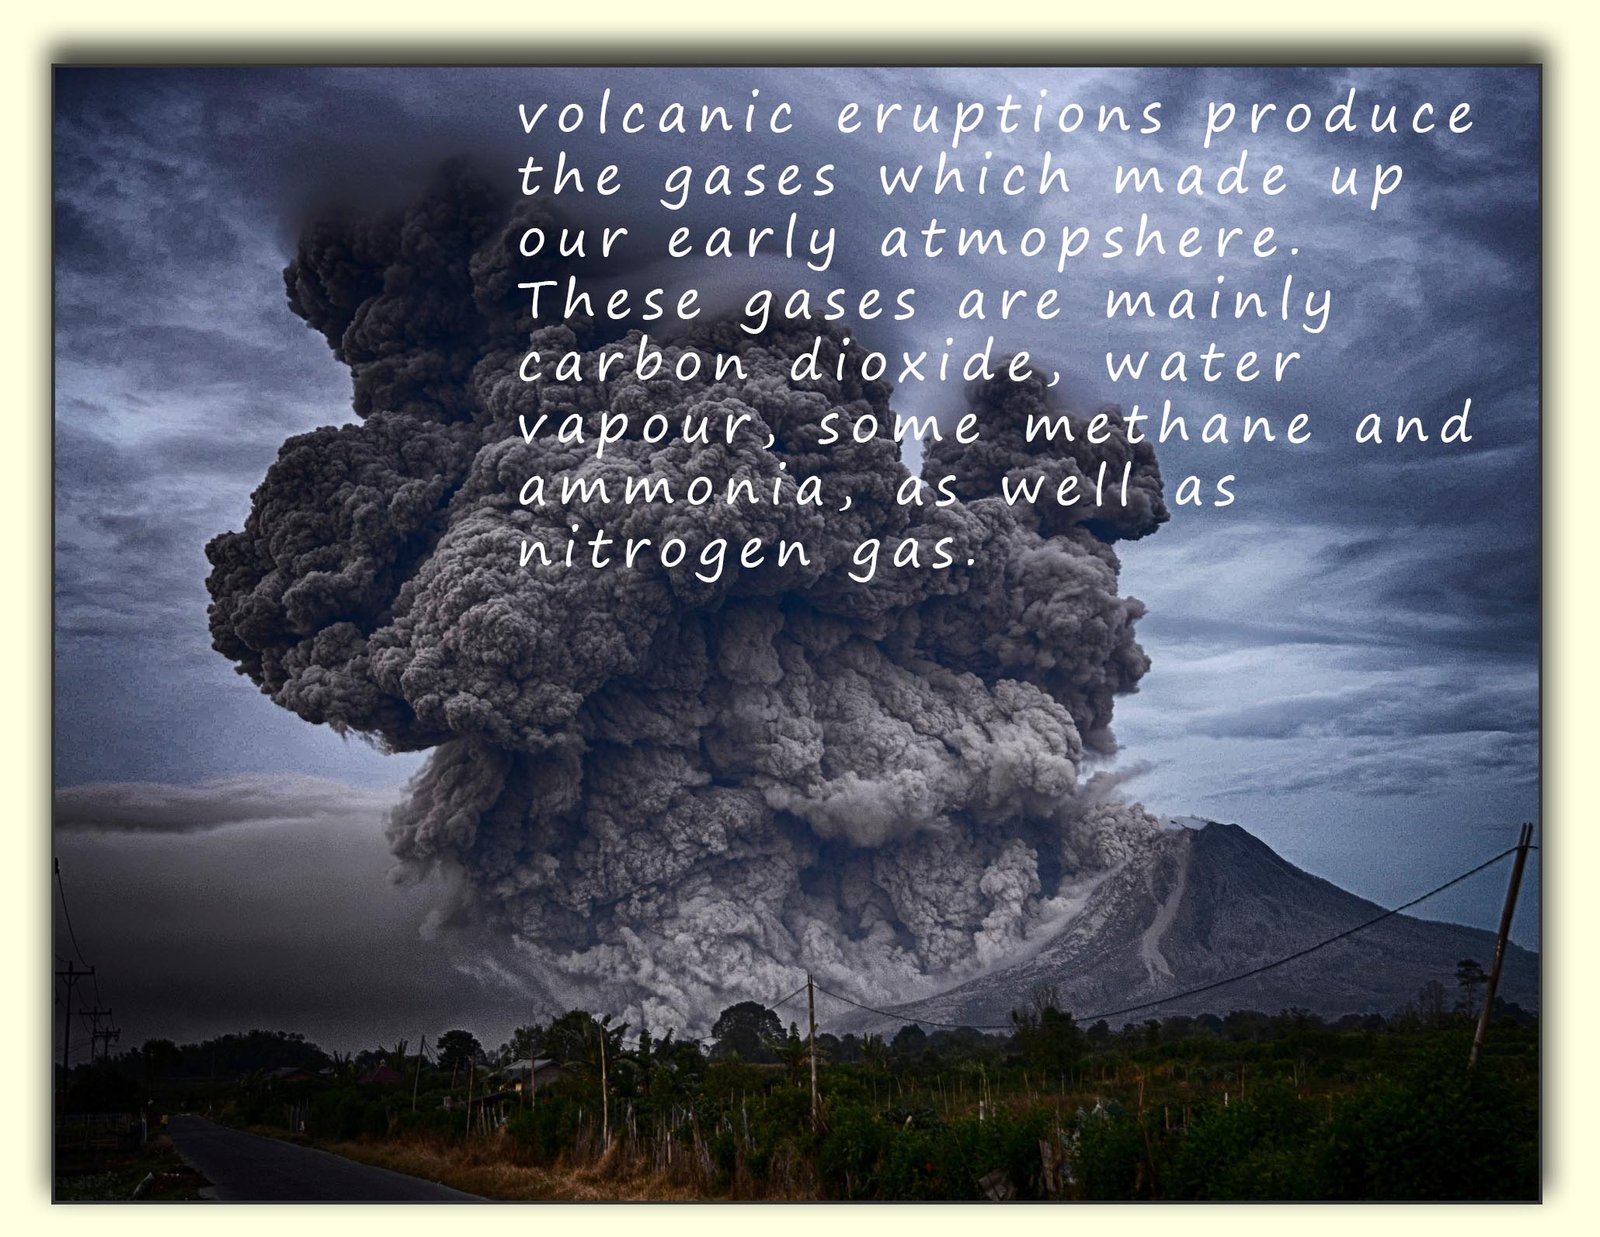 Earth's atmosphere is produced from the gases released by erupting volcanoes